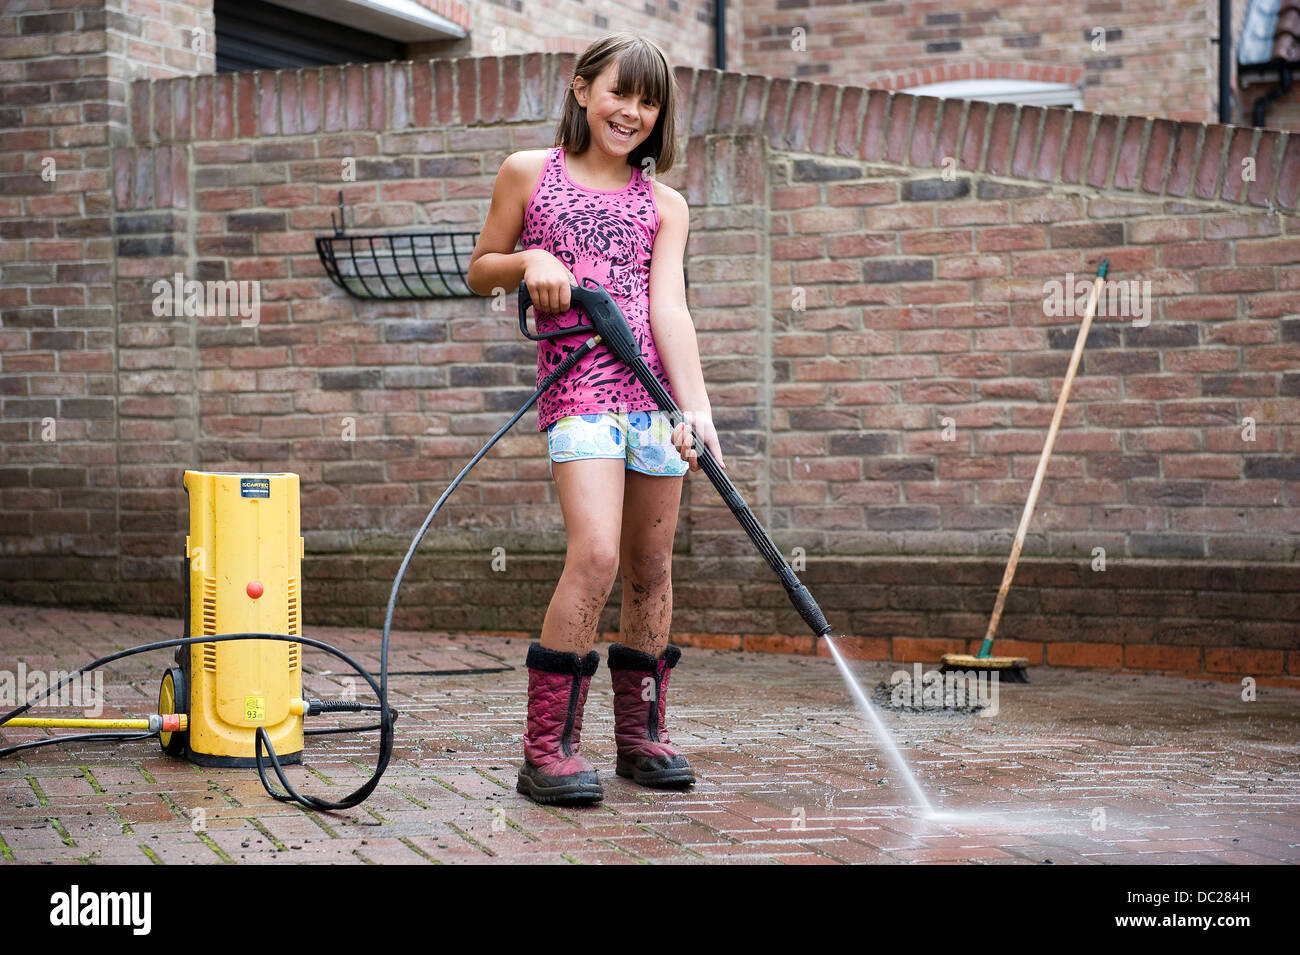 A girl aged 10 uses a power washer to clean the block pave drive at her family home for pocket money. Stock Photo